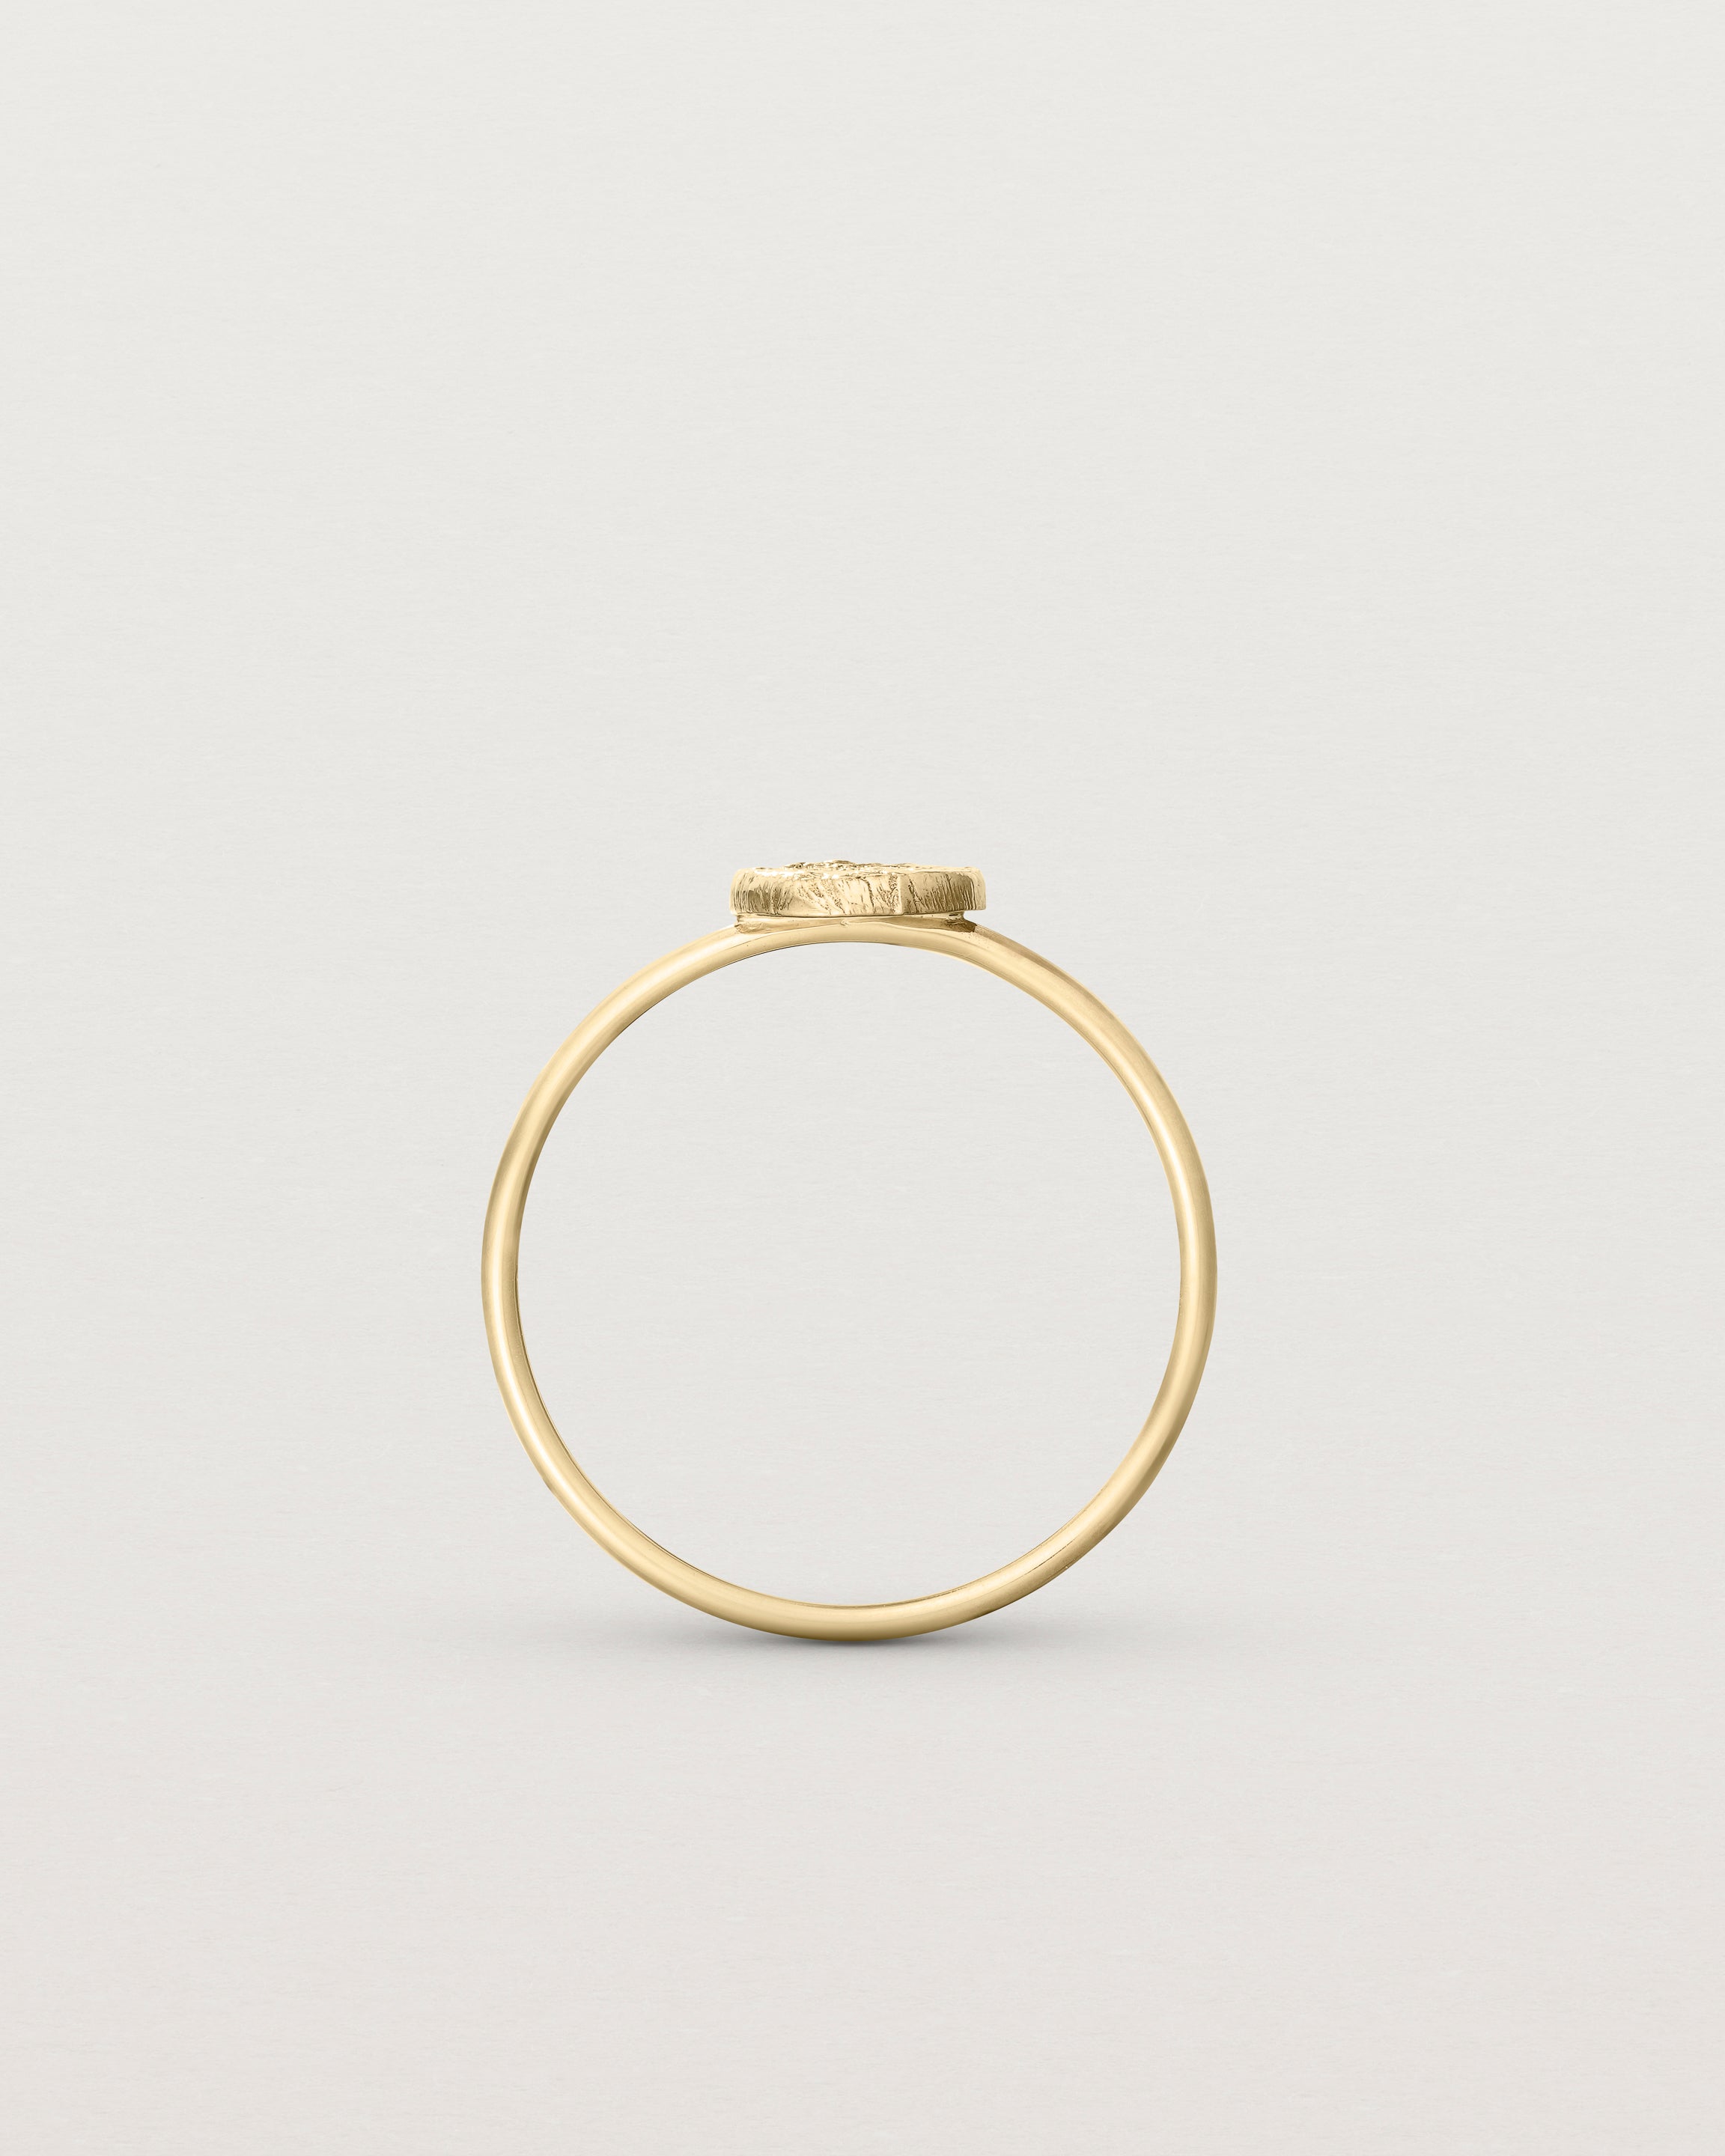 Standing view of the Moon Ring in yellow gold.